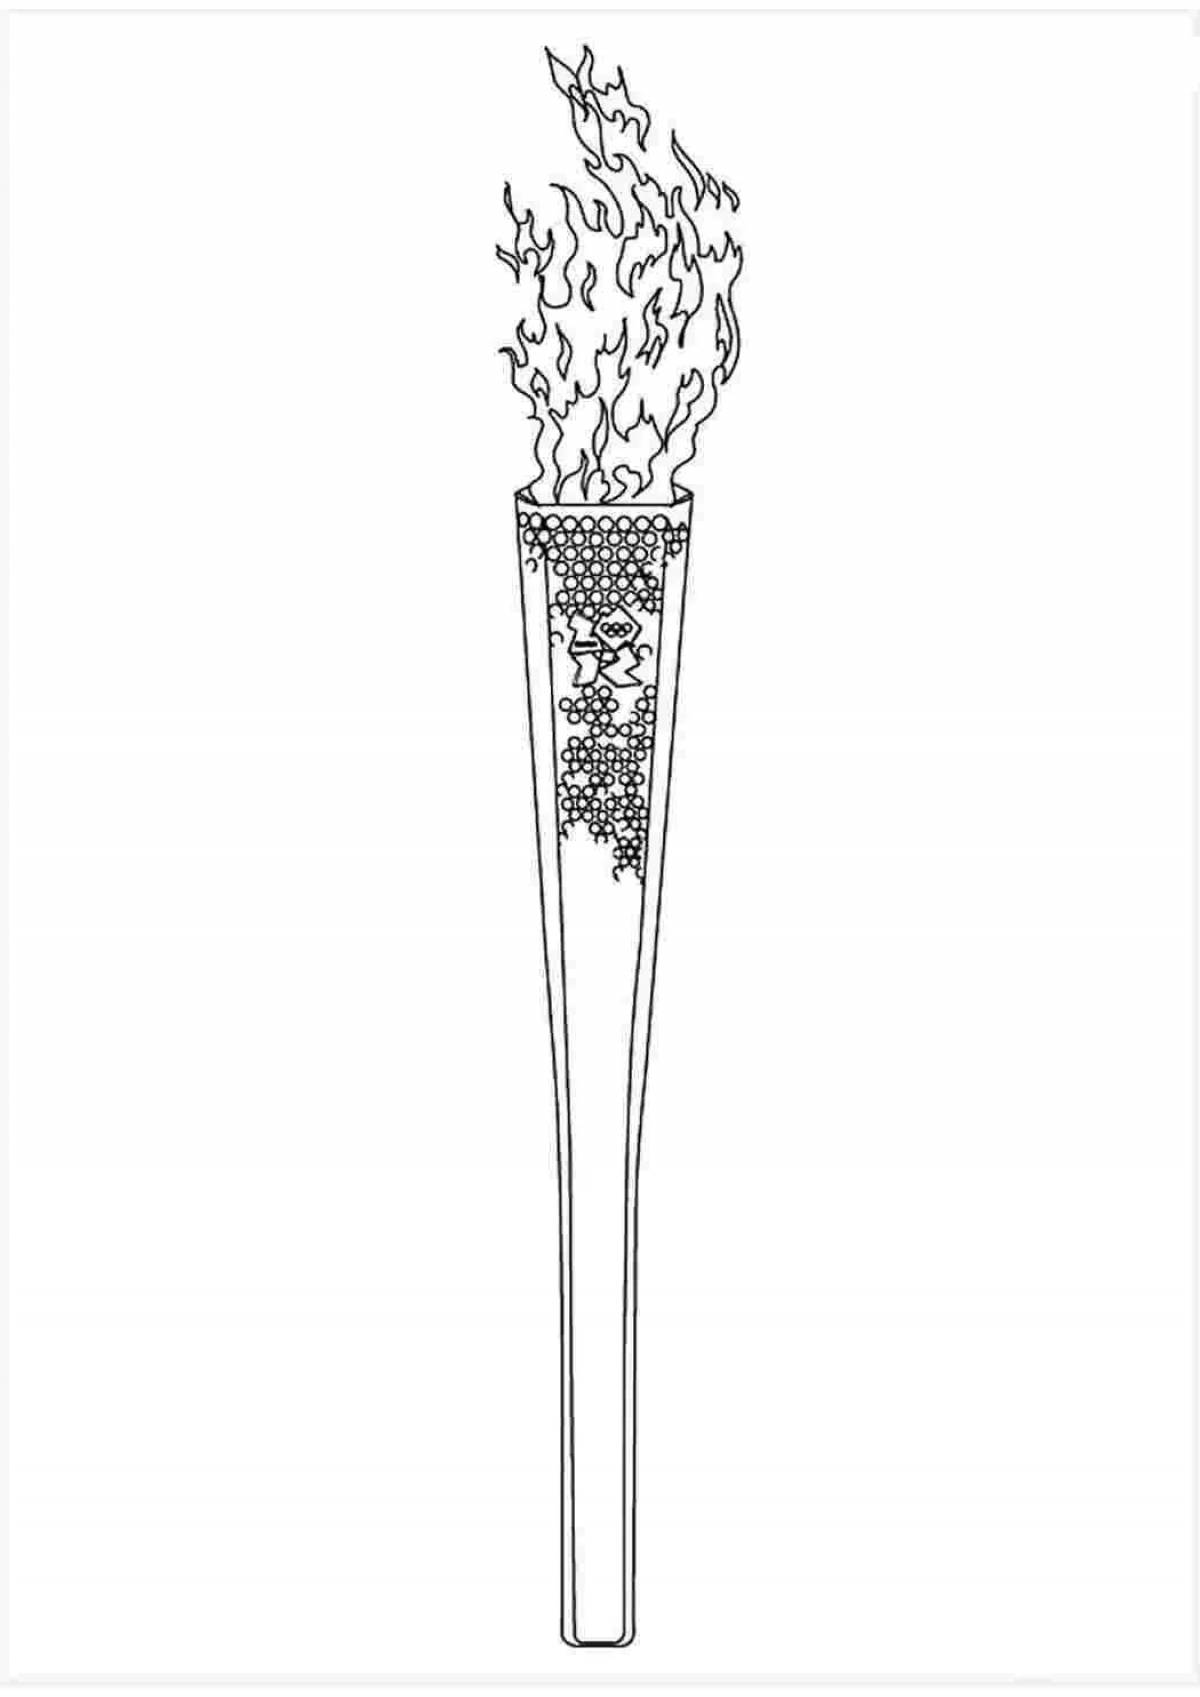 Olympic torch #9